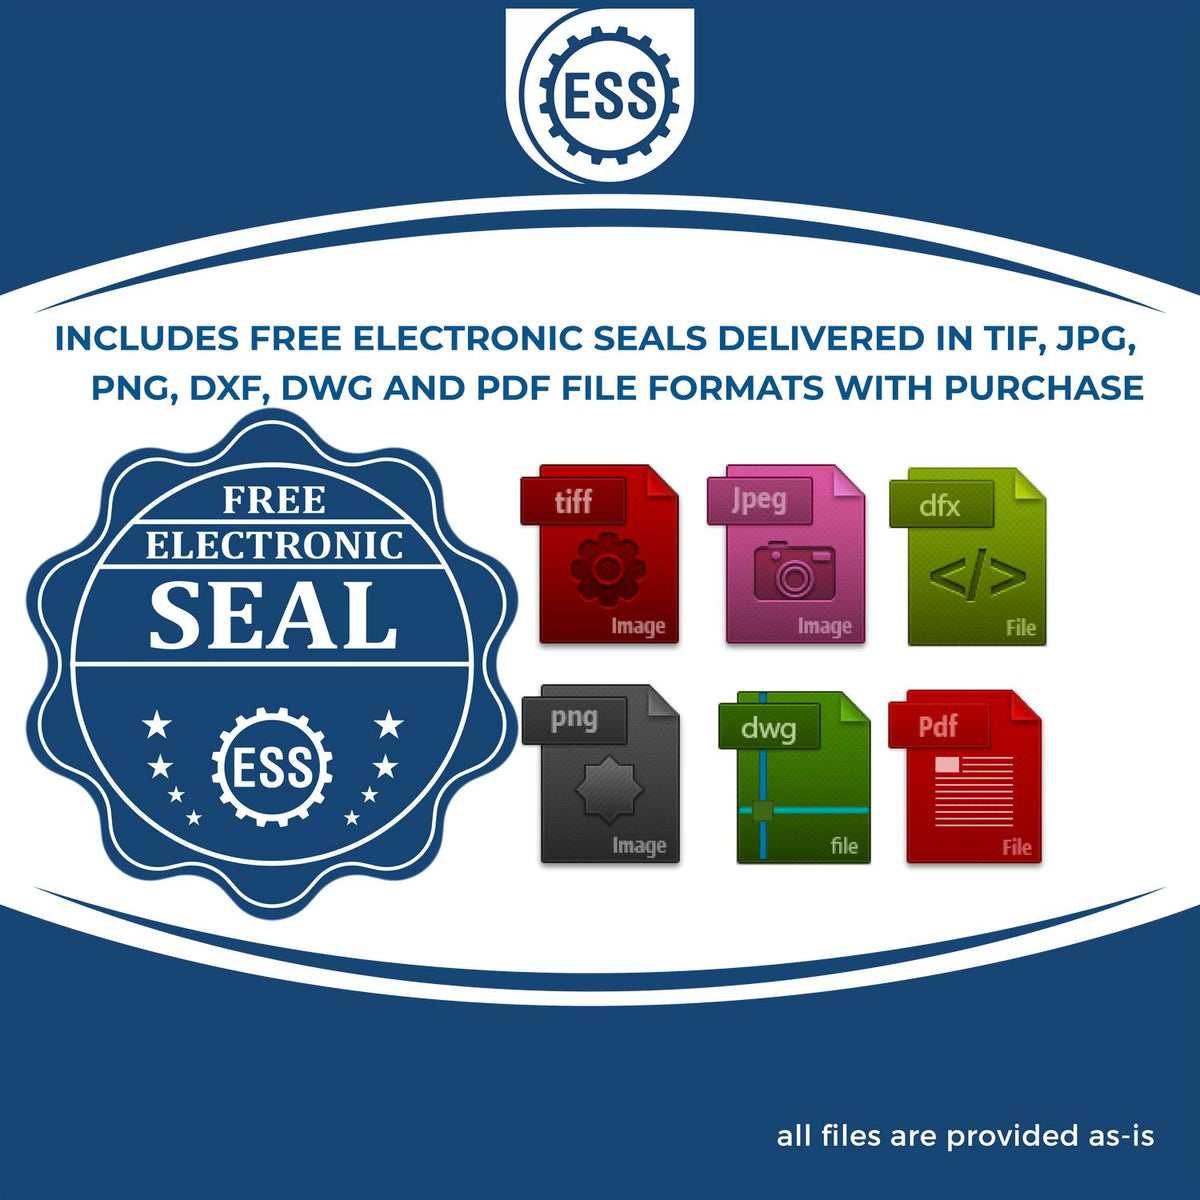 An infographic for the free electronic seal for the Louisiana Engineer Desk Seal illustrating the different file type icons such as DXF, DWG, TIF, JPG and PNG.